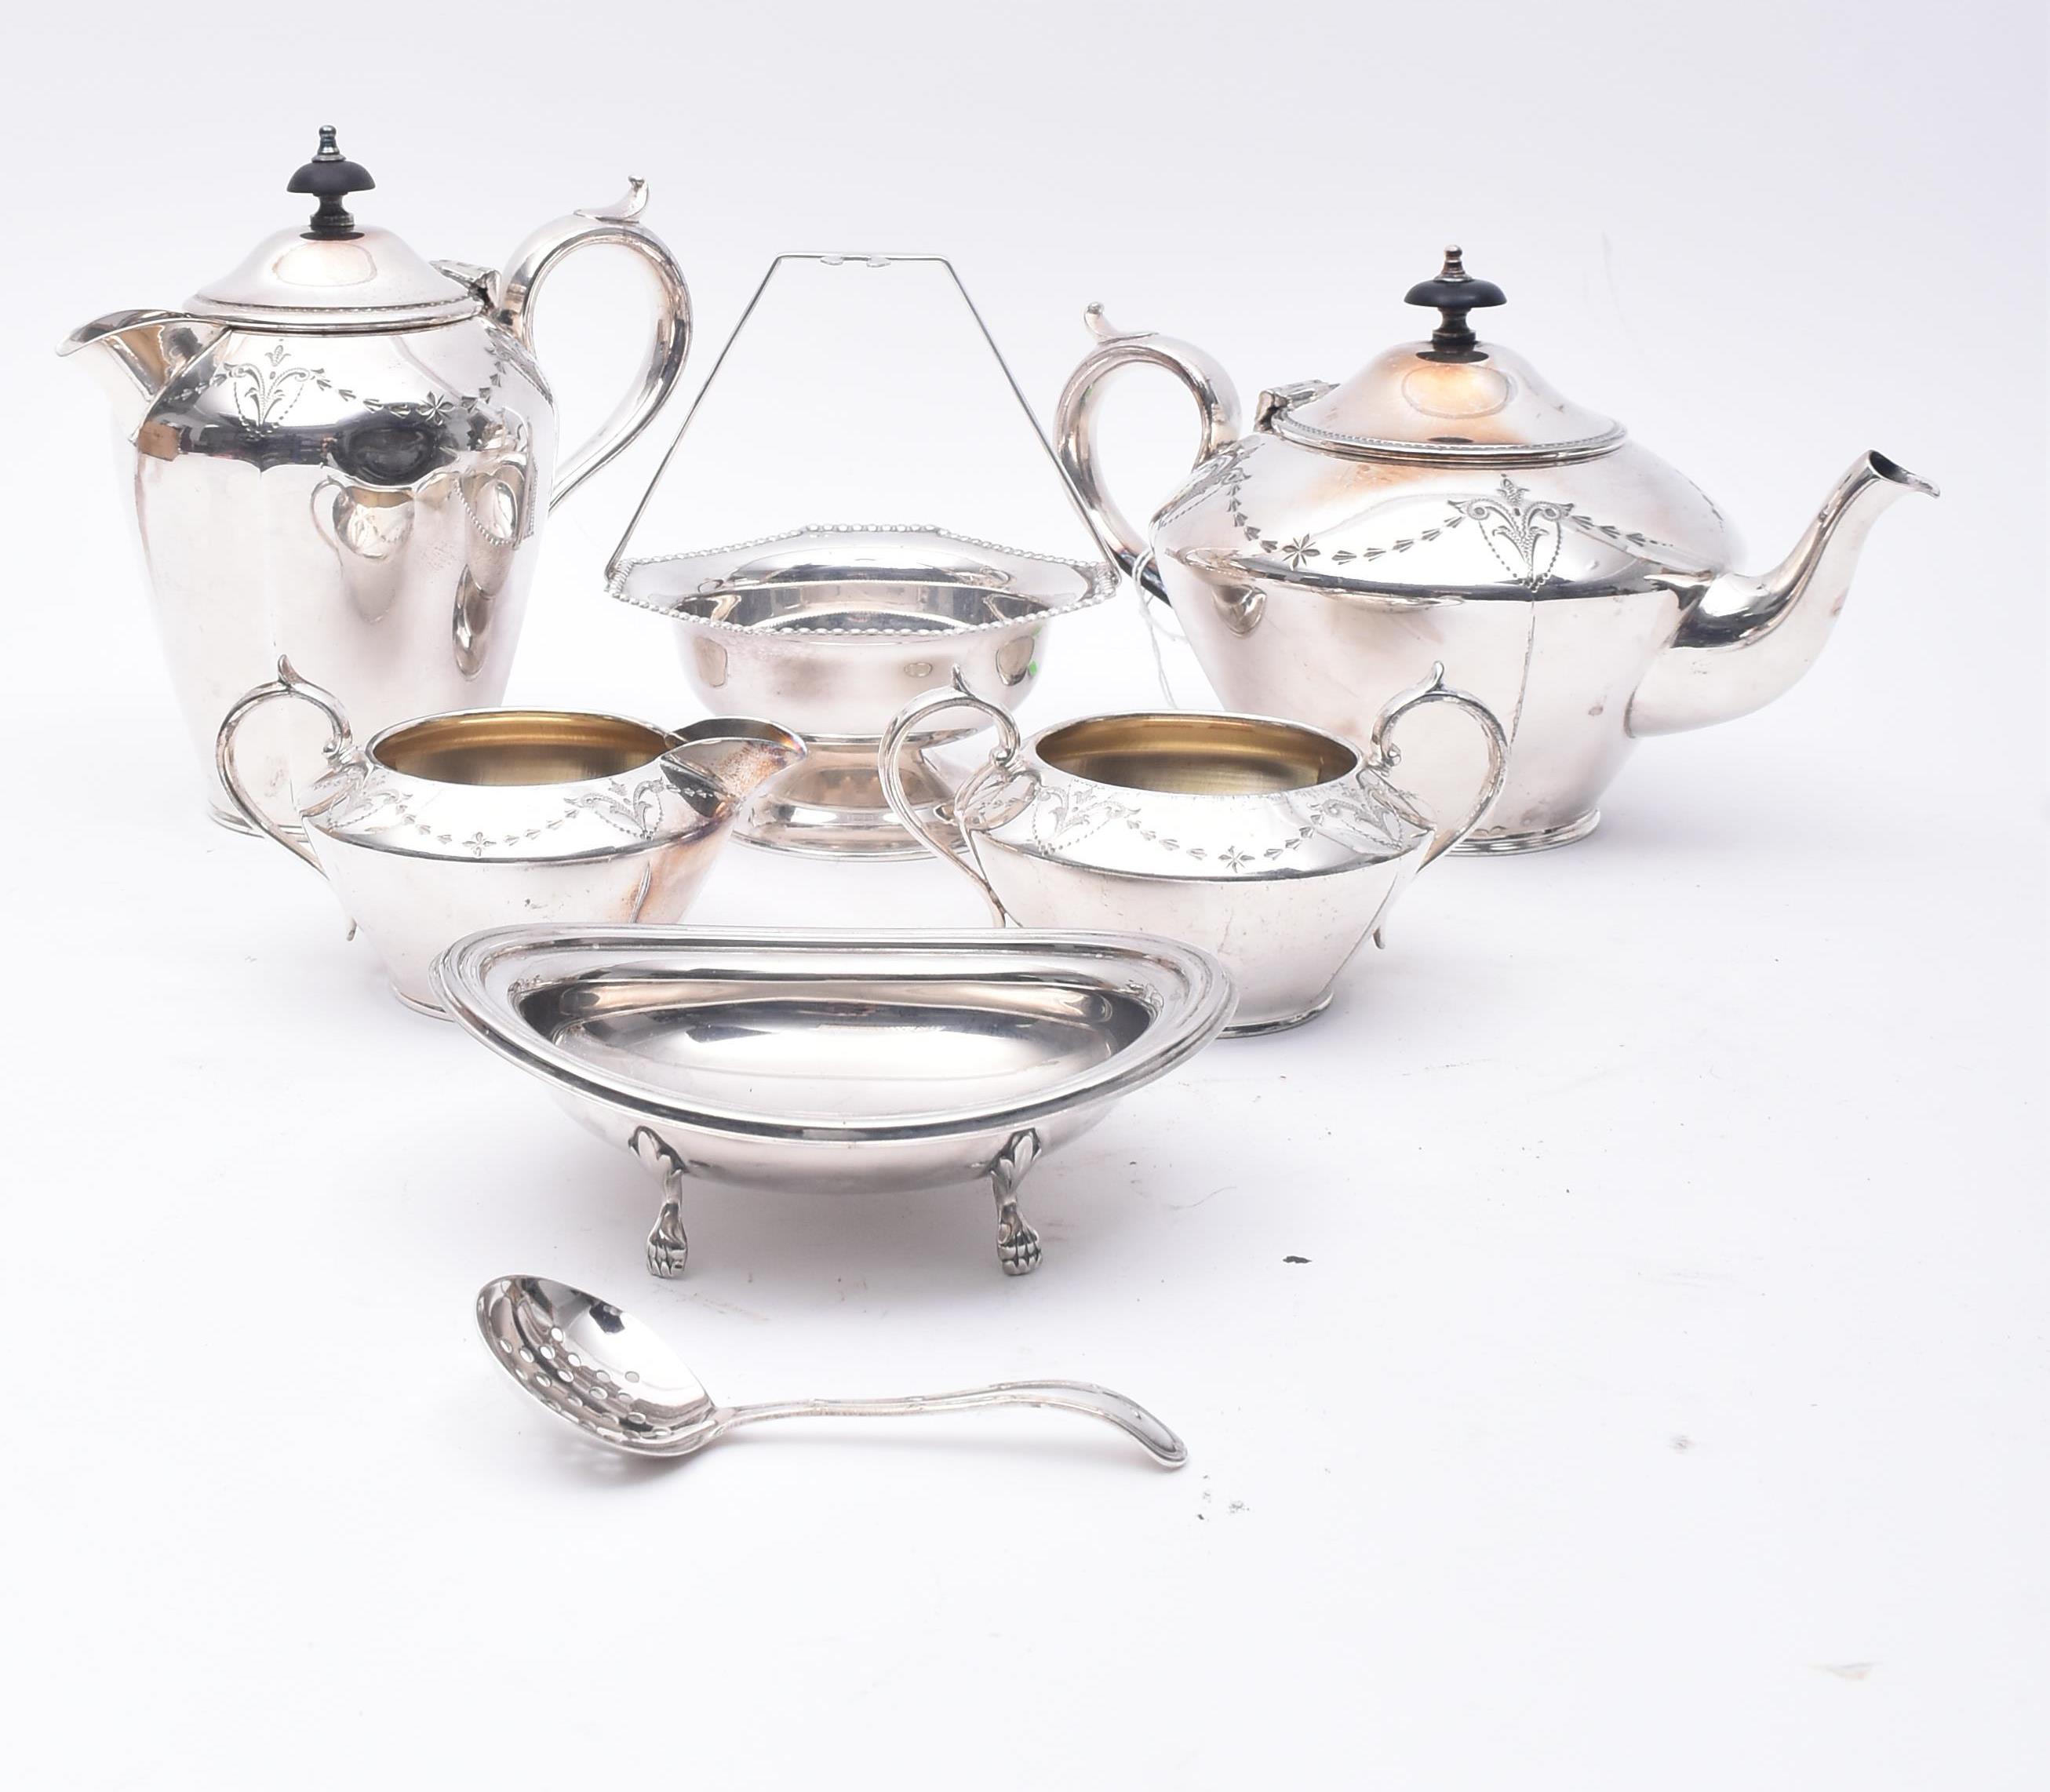 EARLY 20TH CENTURY SILVER PLATED TEA SERVICE WITH TEAPOT